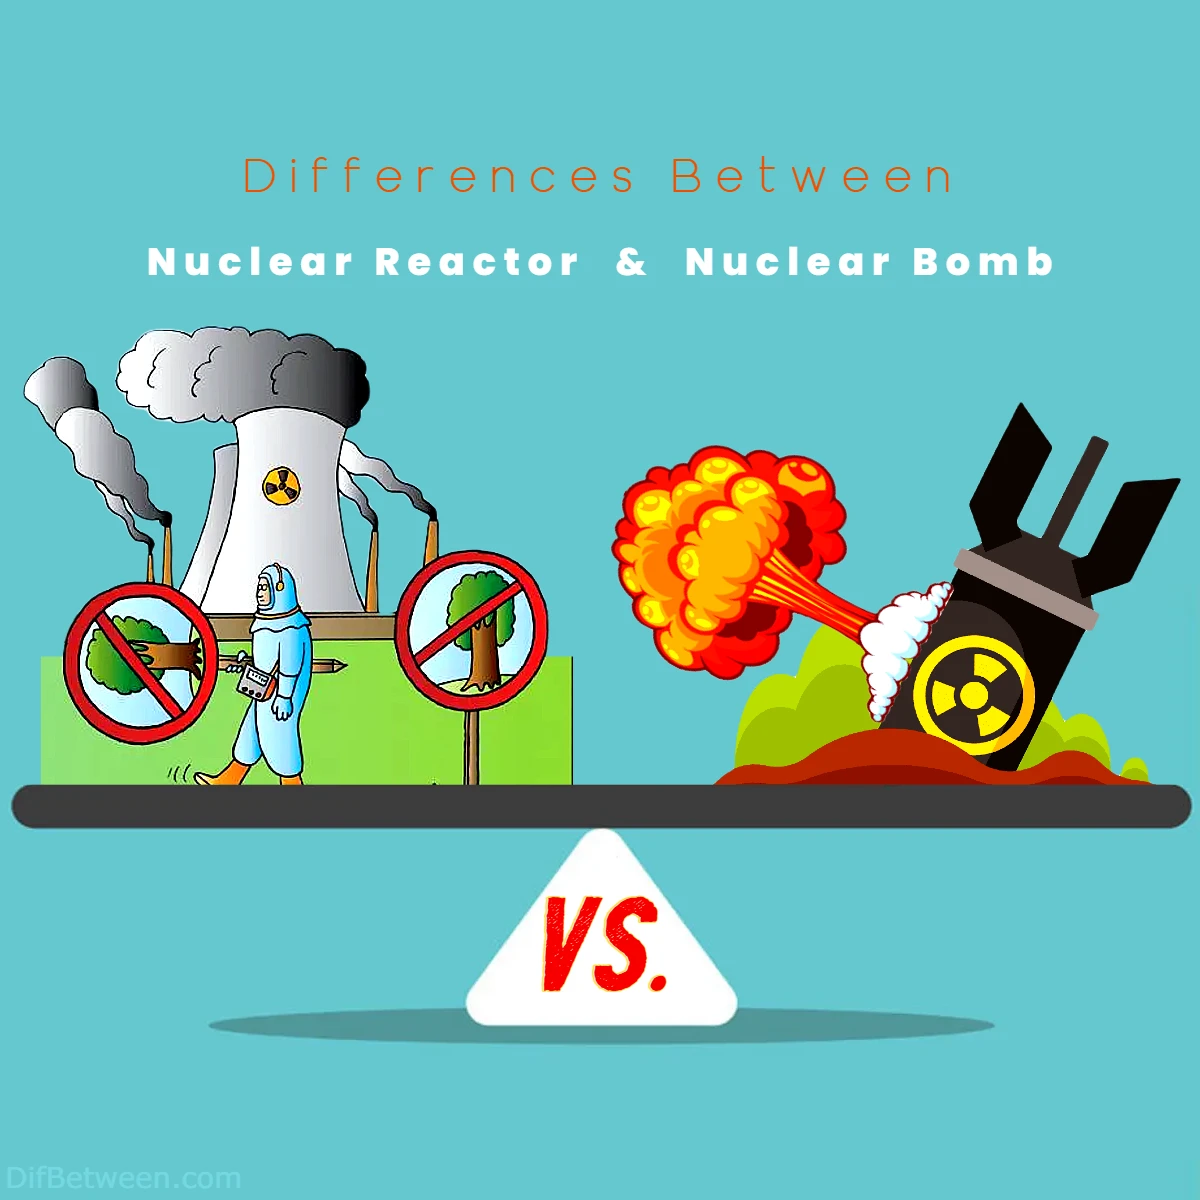 Differences Between Nuclear Reactor vs Nuclear Bomb